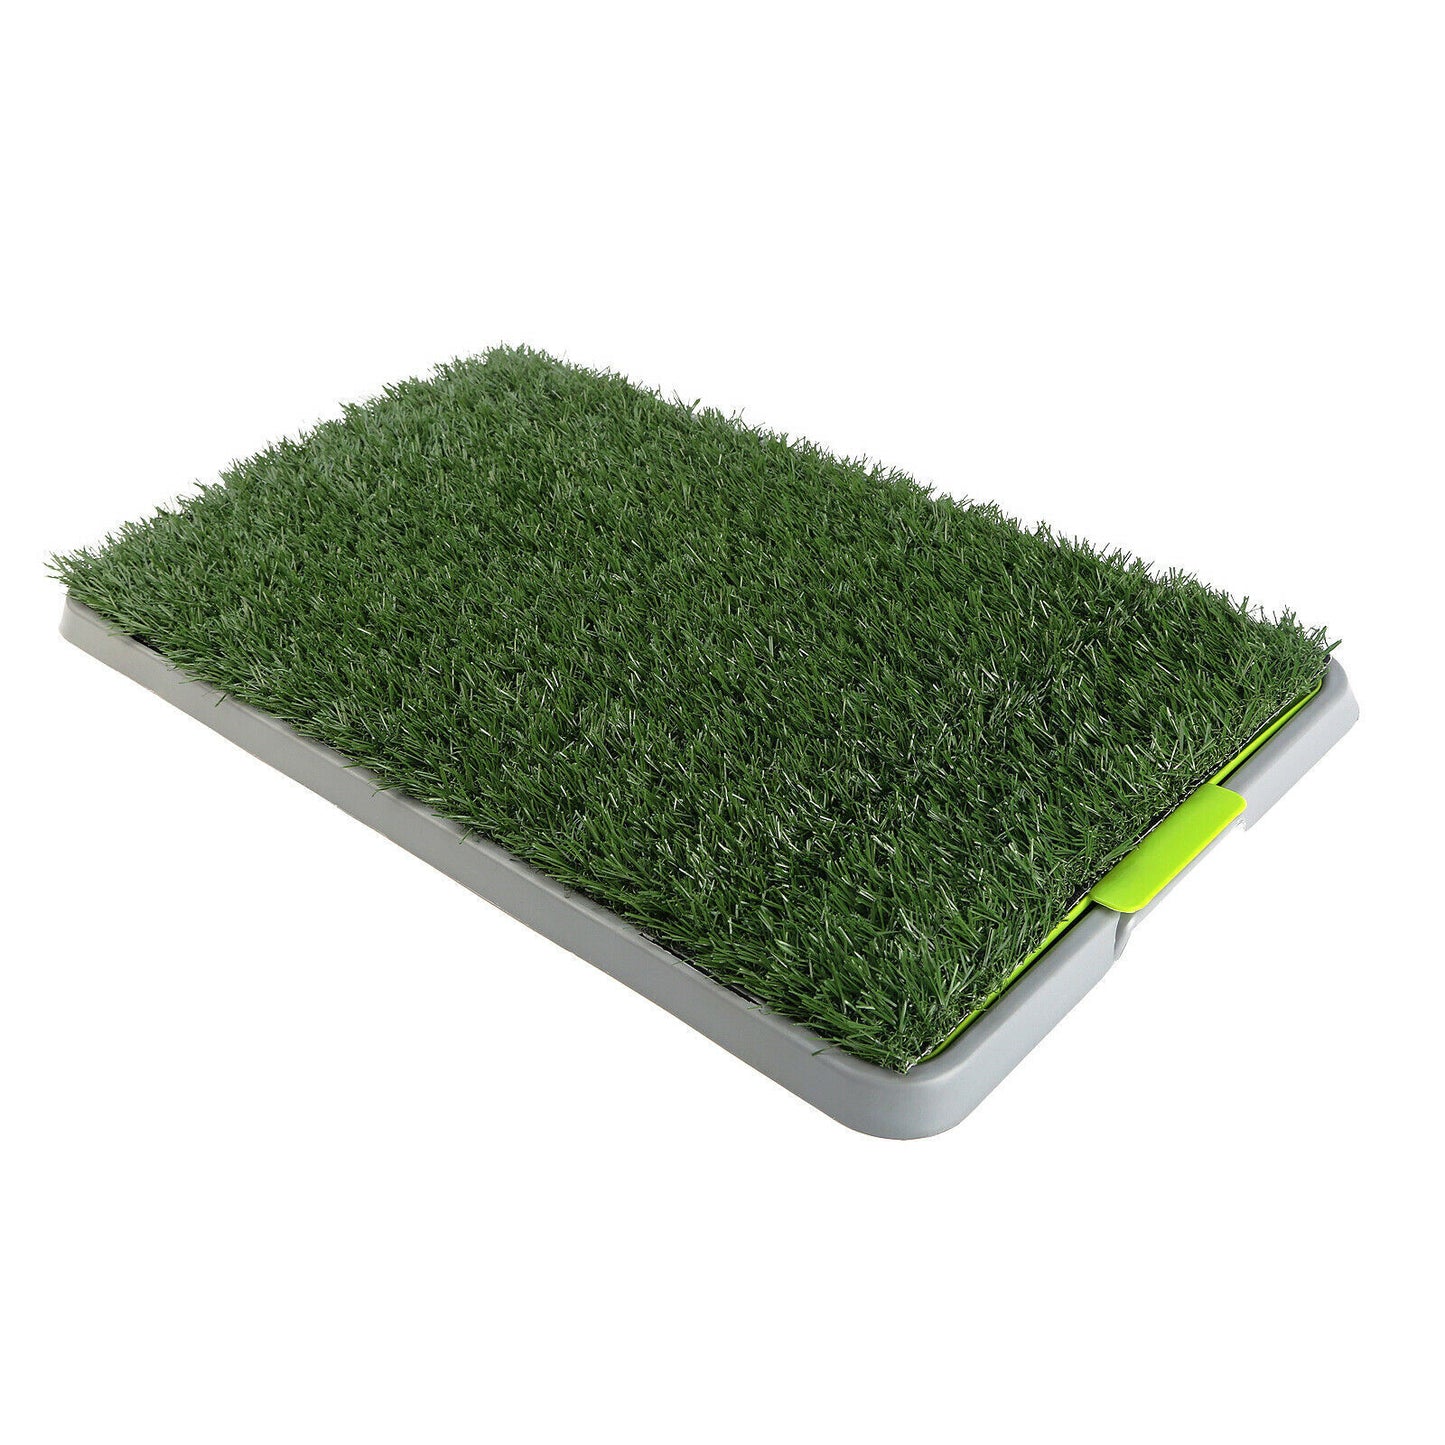 3 x Grass replacement only for Dog Potty Pad 64 X 39 cm